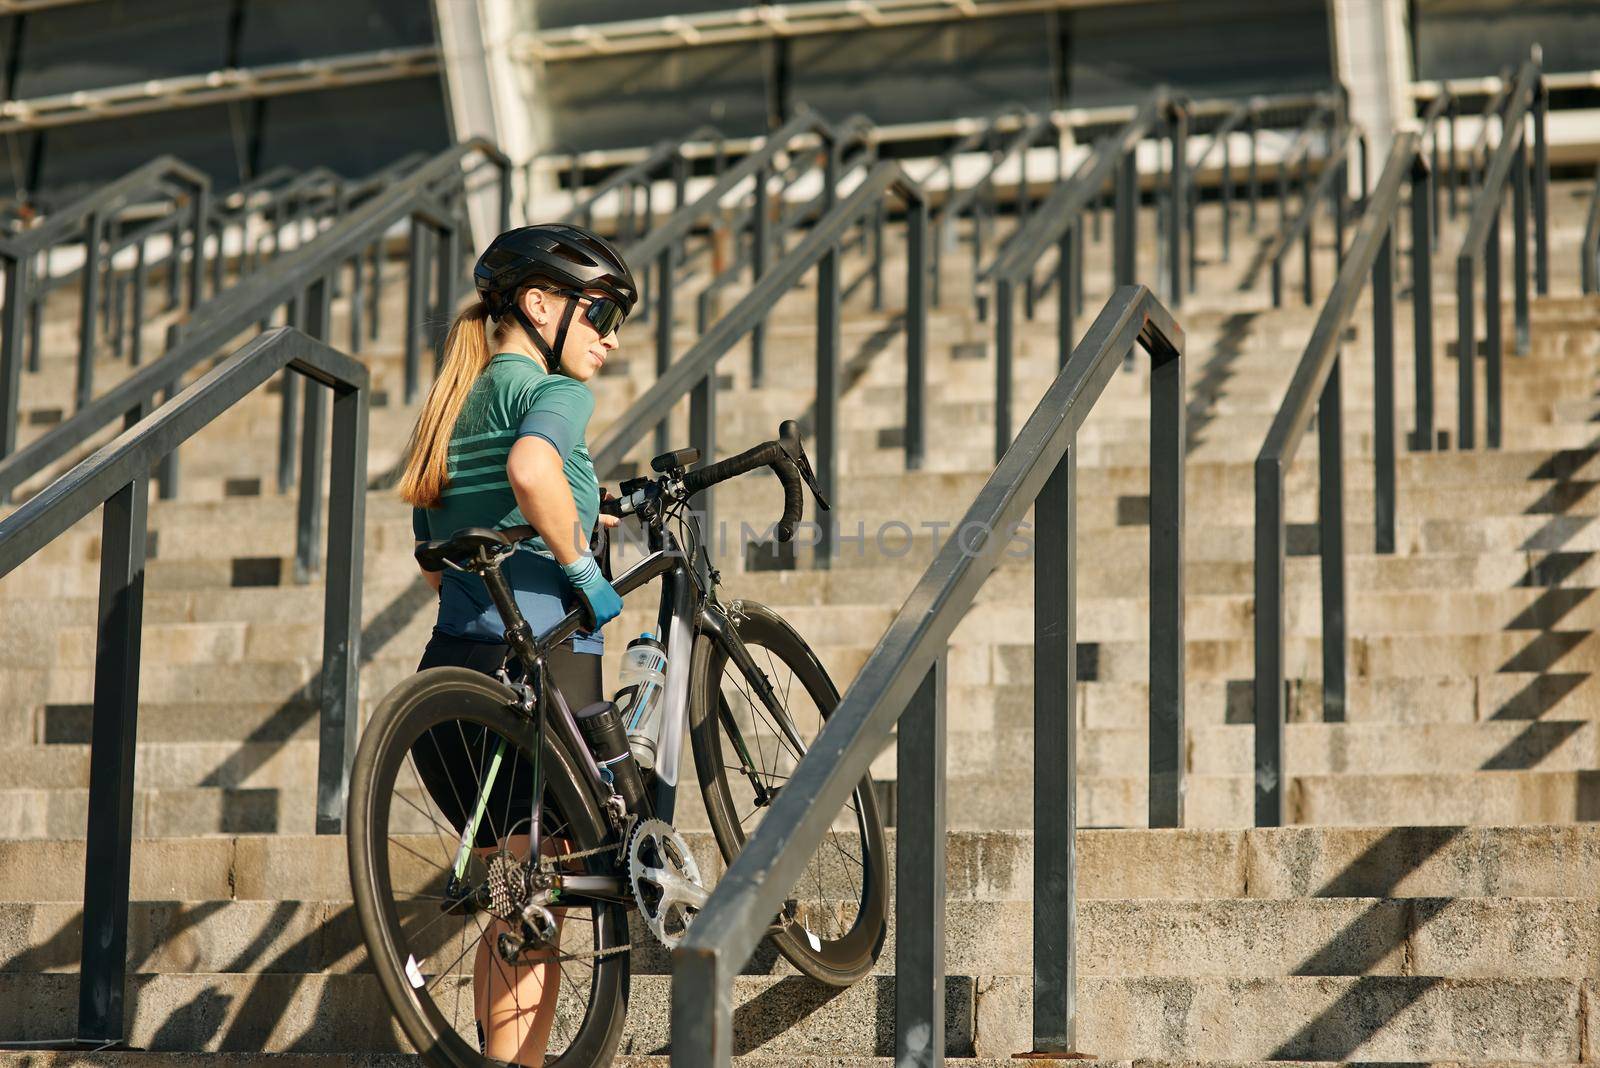 Sportive young woman, professional female cyclist looking away while coming up the steps with bicycle, training outdoors. Sports, active lifestyle concept